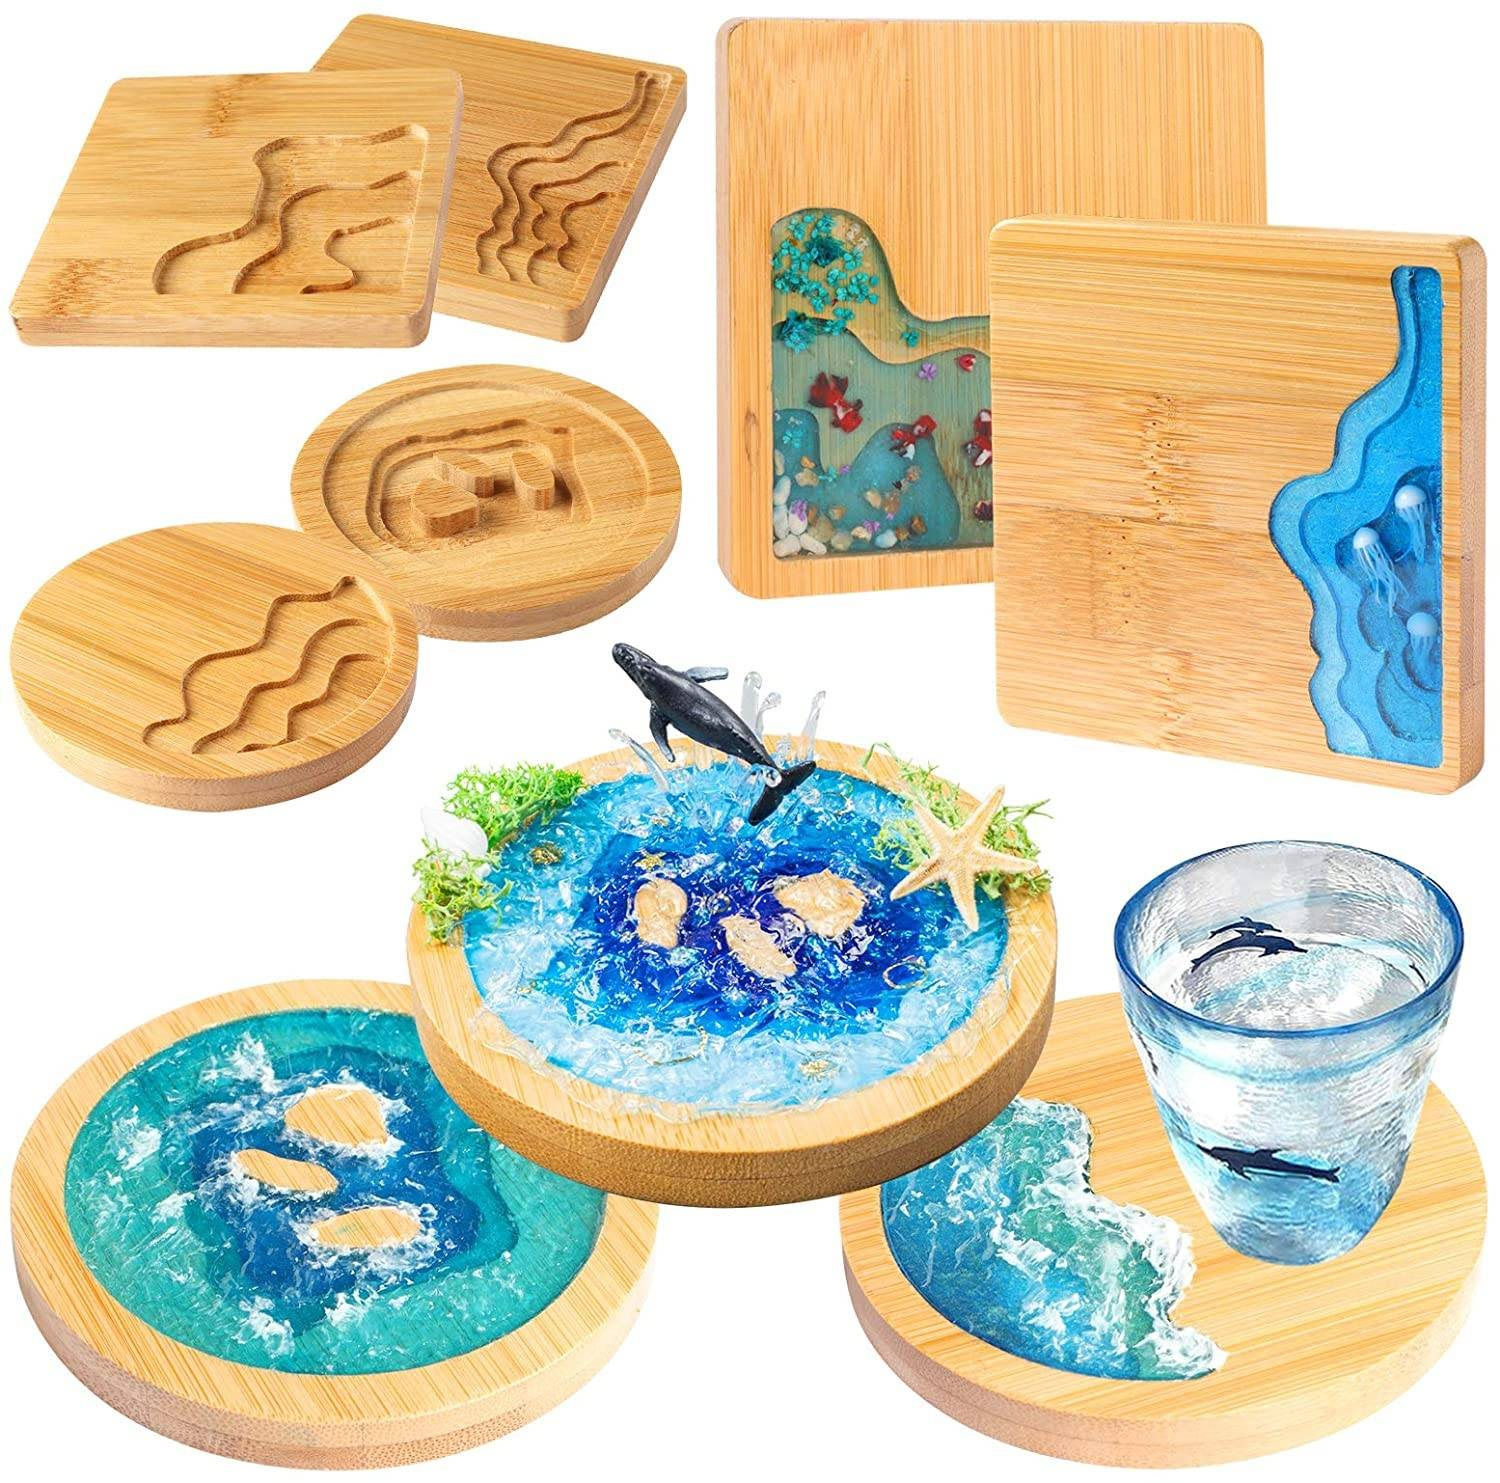 hardwood-coasters-for-your-drink-and-pans.-74961.jpg